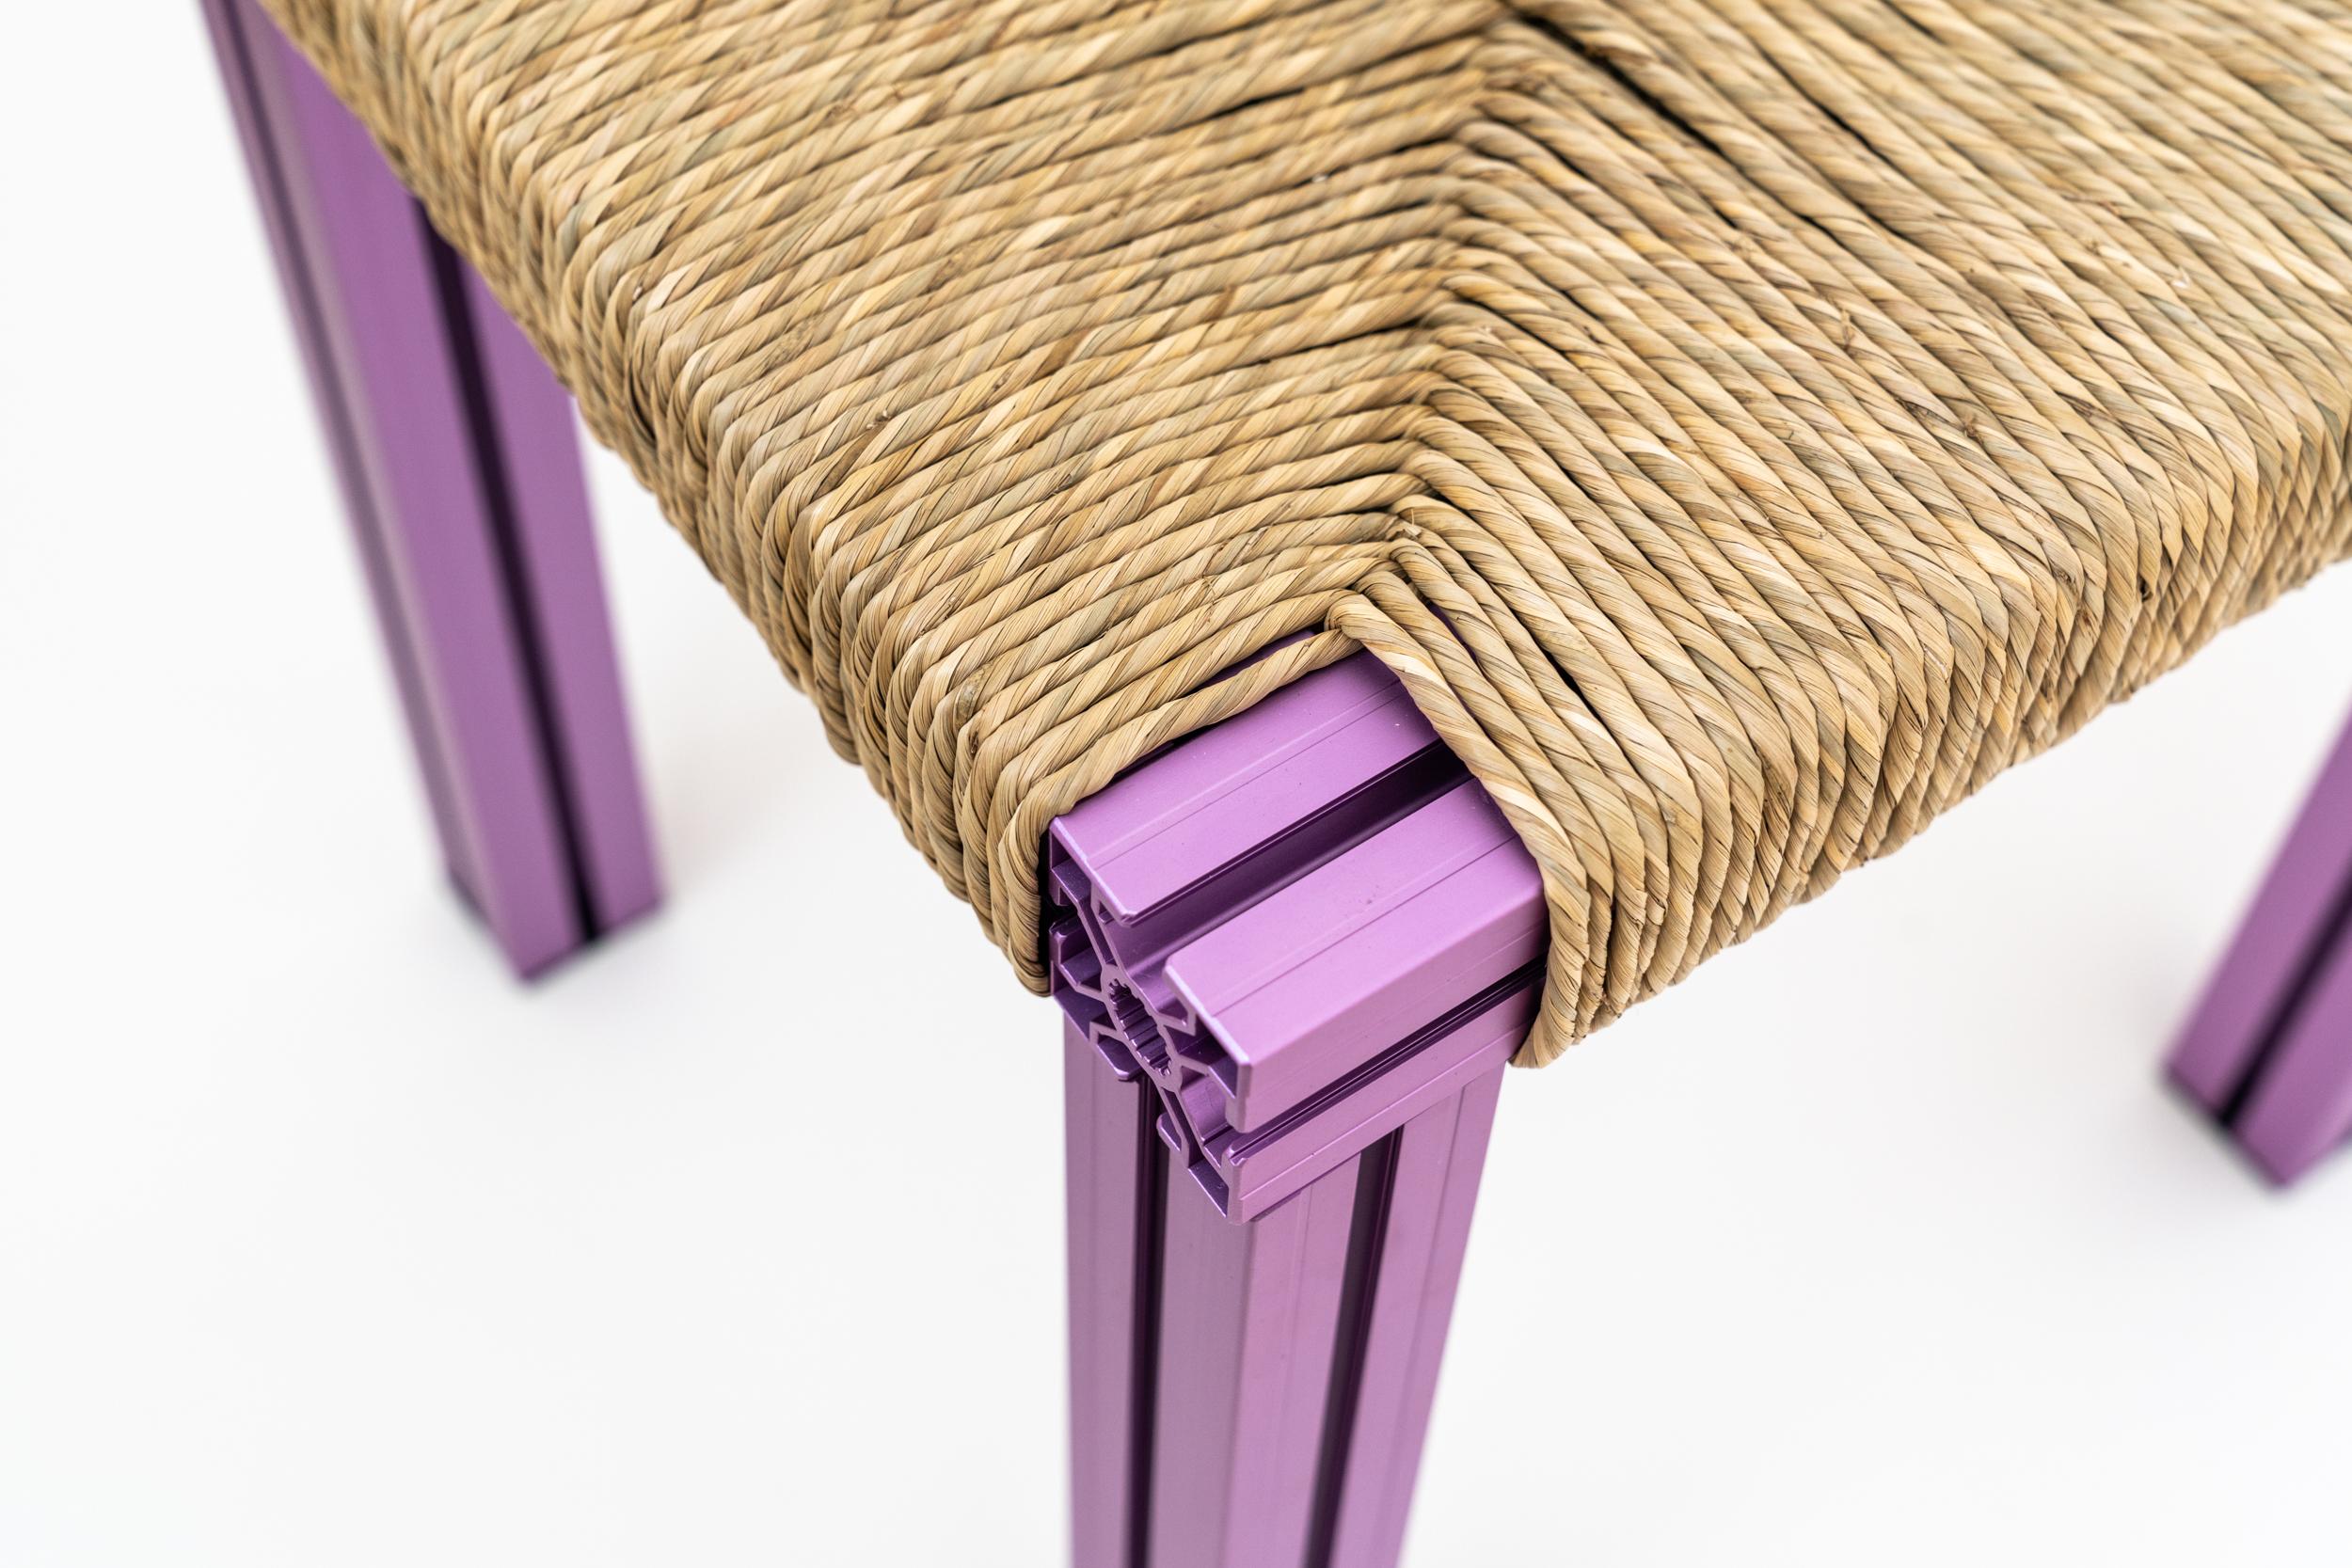 Contemporary Anodized Purple and Rush Weave Wicker Stool by Tino Seubert For Sale